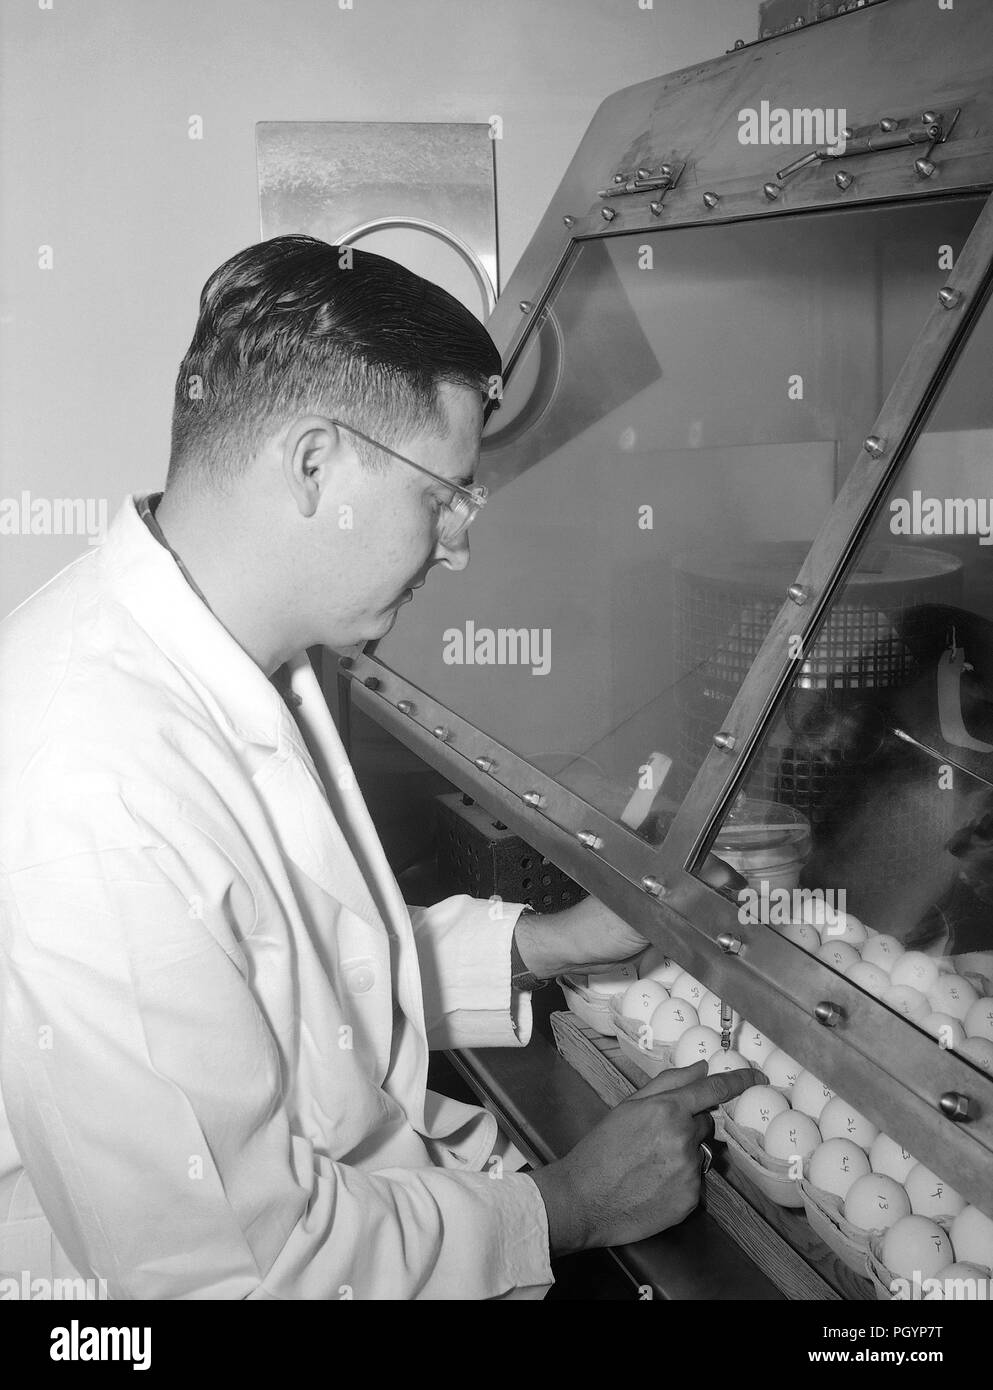 Black and white photograph of Dr Hersey, Capt, USAF, wearing a white coat while inoculating the yolk sacs of embryonated chicken eggs during a Ricketts infectivity study, image courtesy CDC, 1980. () Stock Photo